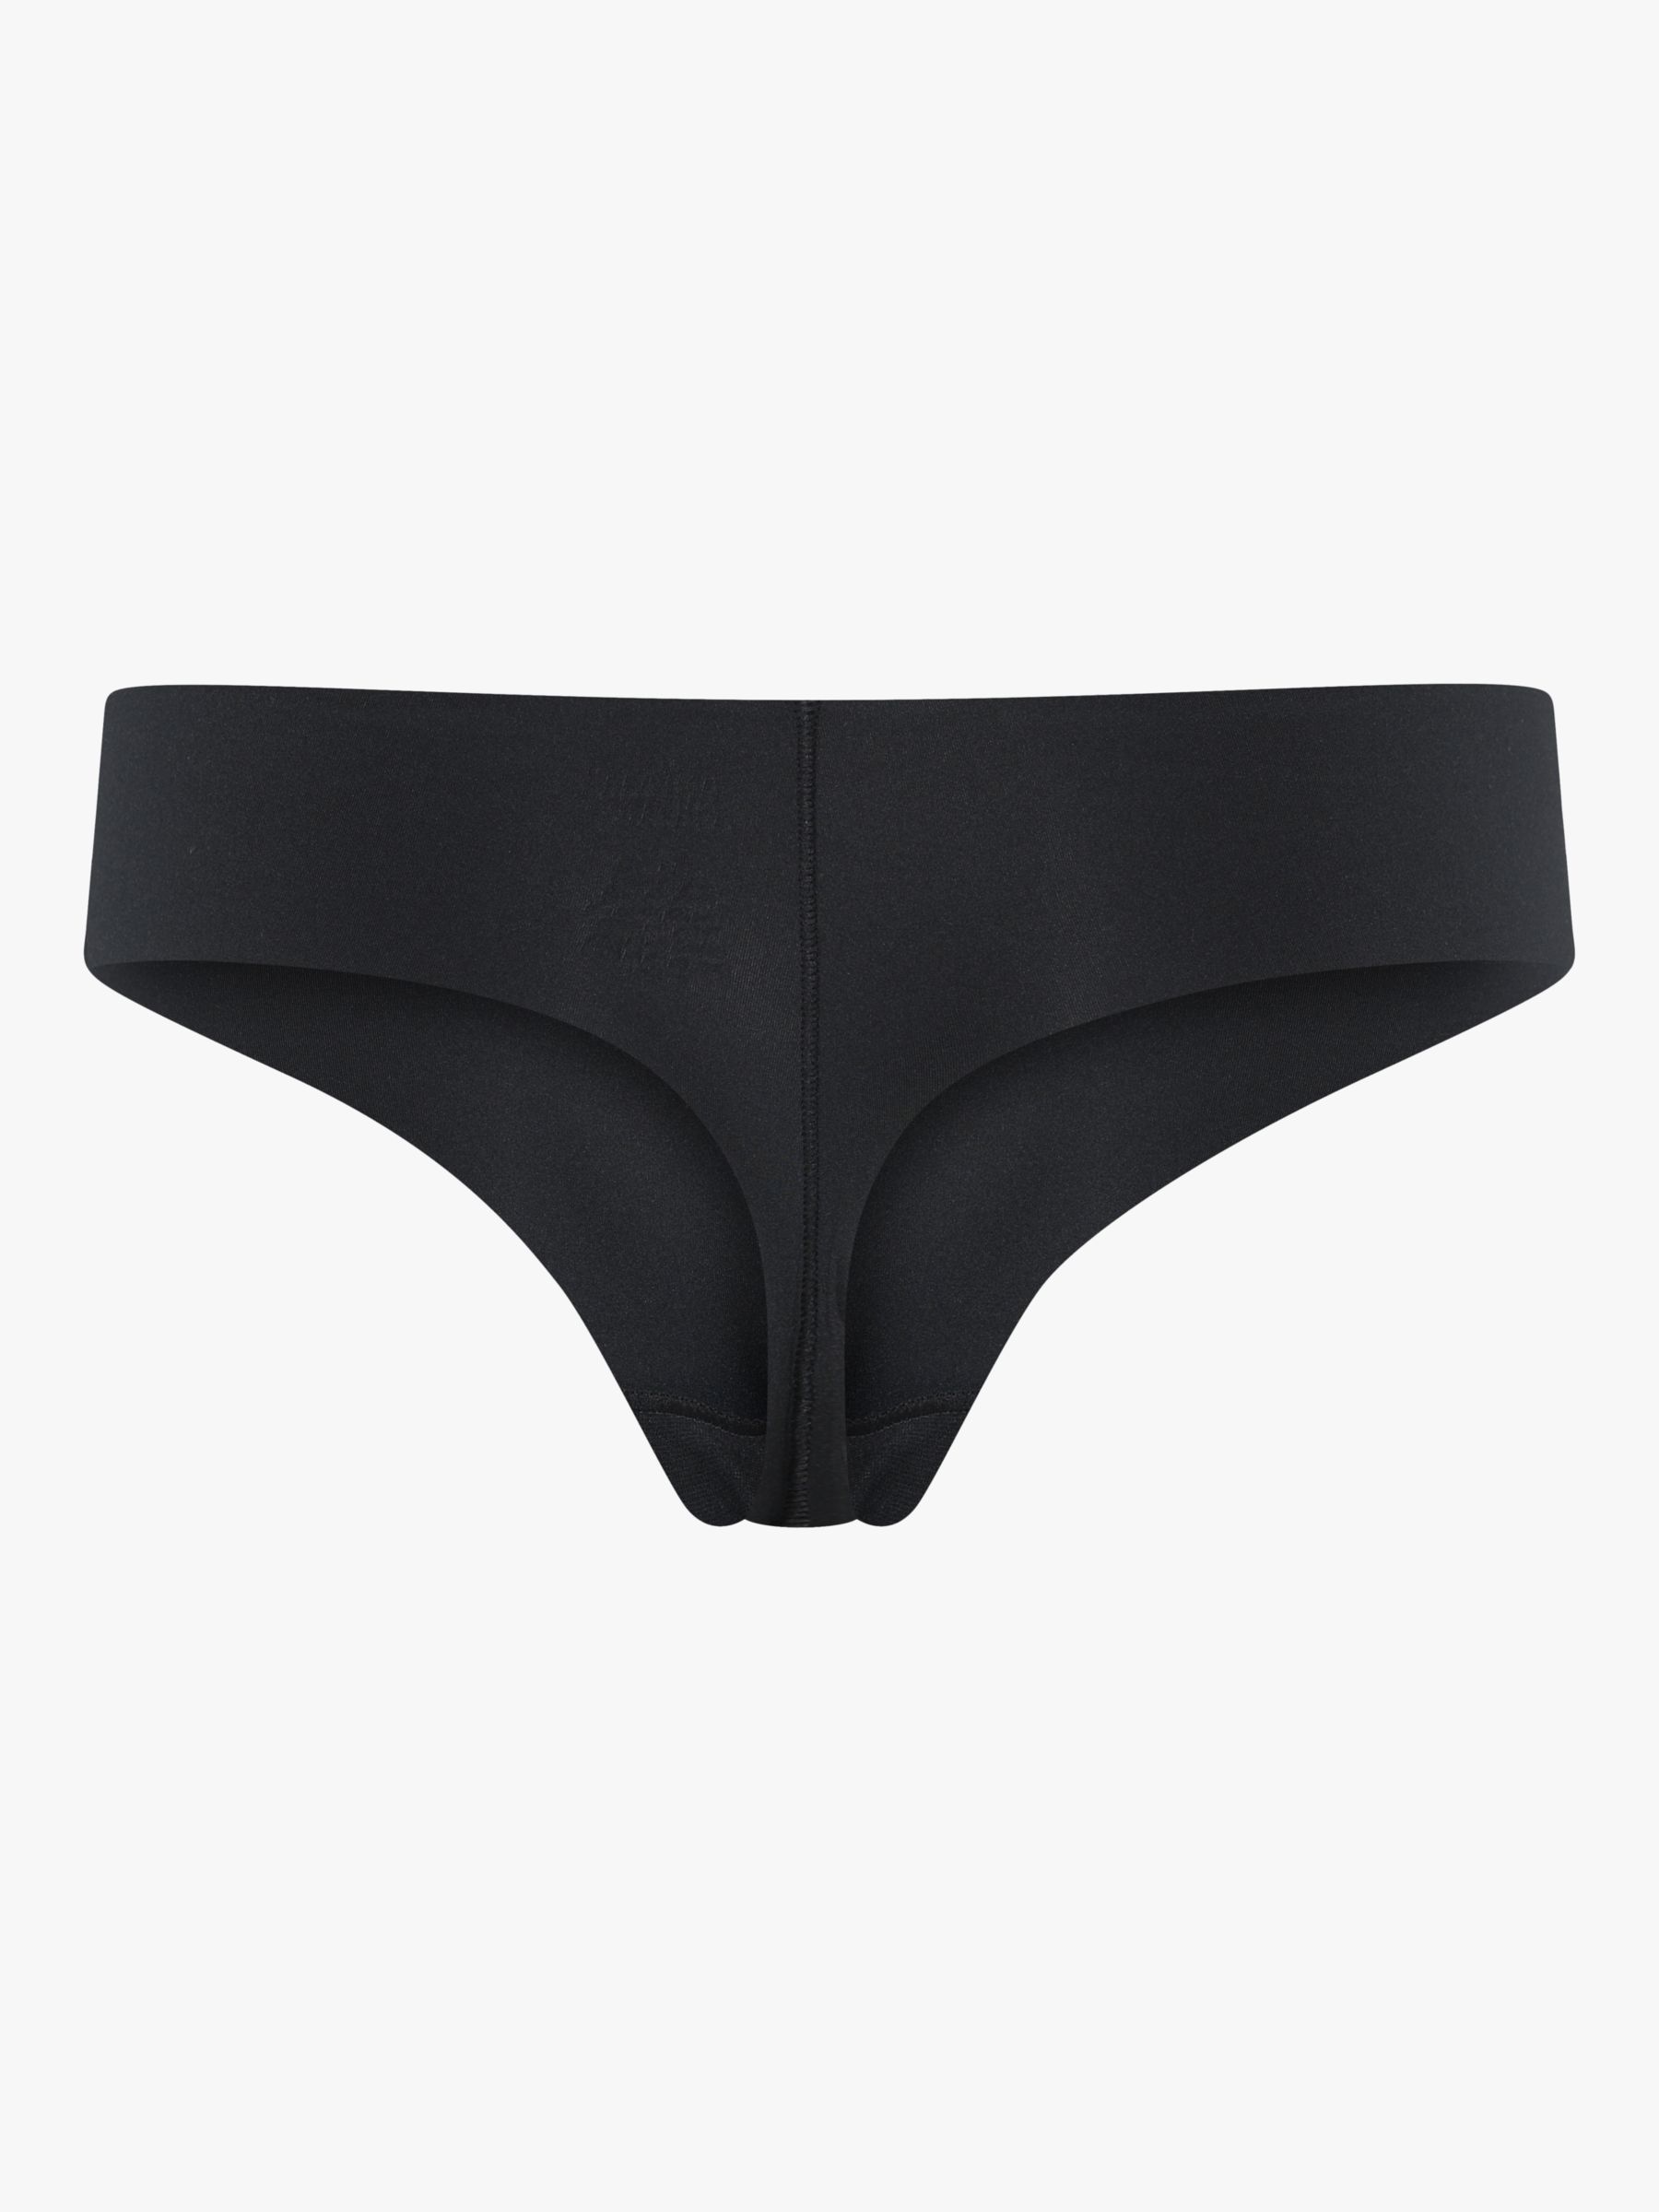 Buy Girlfriend Collective Plain Sports Thong, Black Online at johnlewis.com